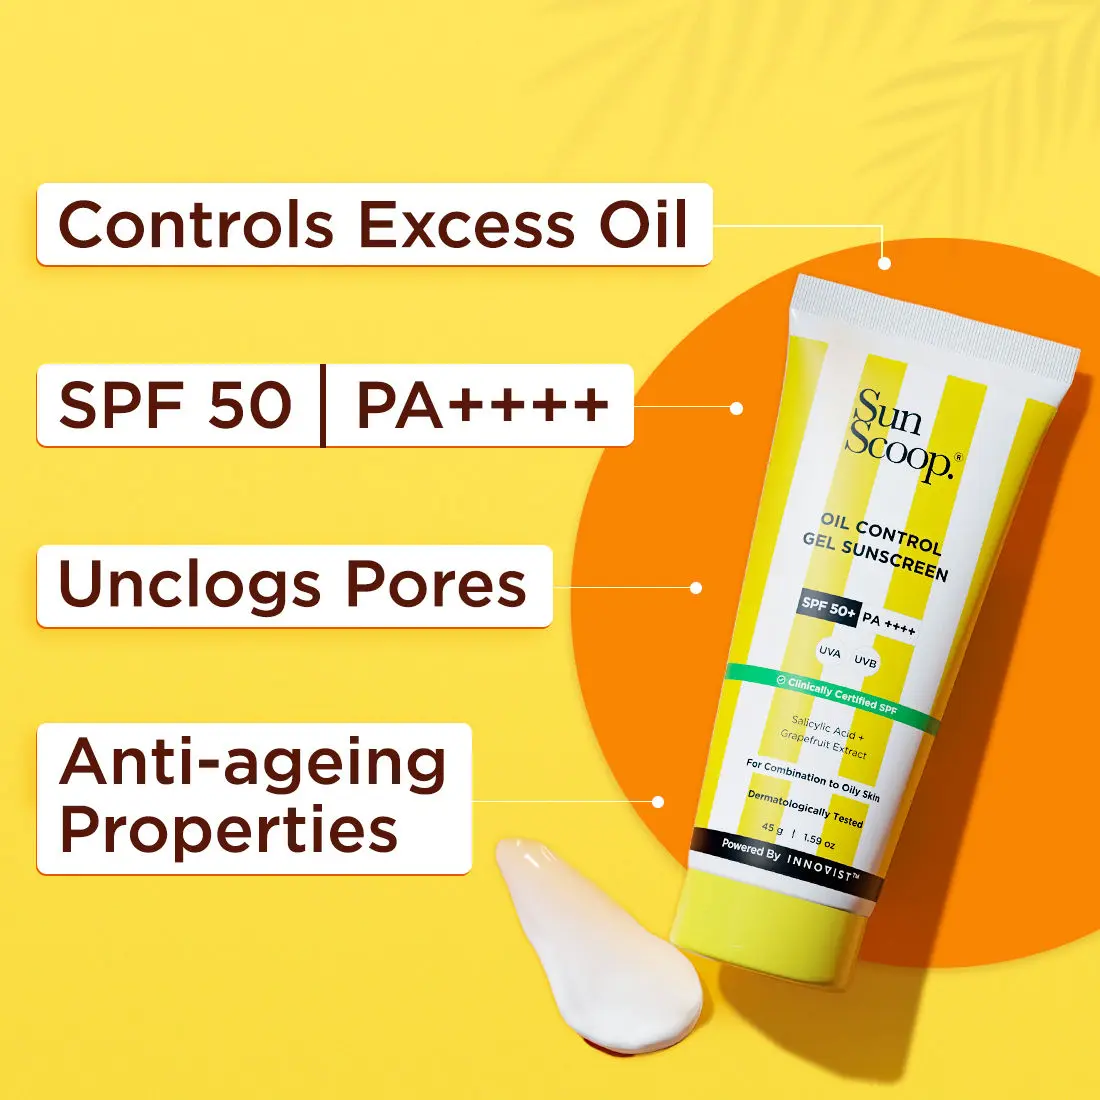 Sunscoop Oil-Control Gel Sunscreen | SPF 50+, PA++++ | Mineral Oil & Petroleum Free | Controls Excess Oil | Unclogs Pores | Anti-ageing | Lightweight | 45 g